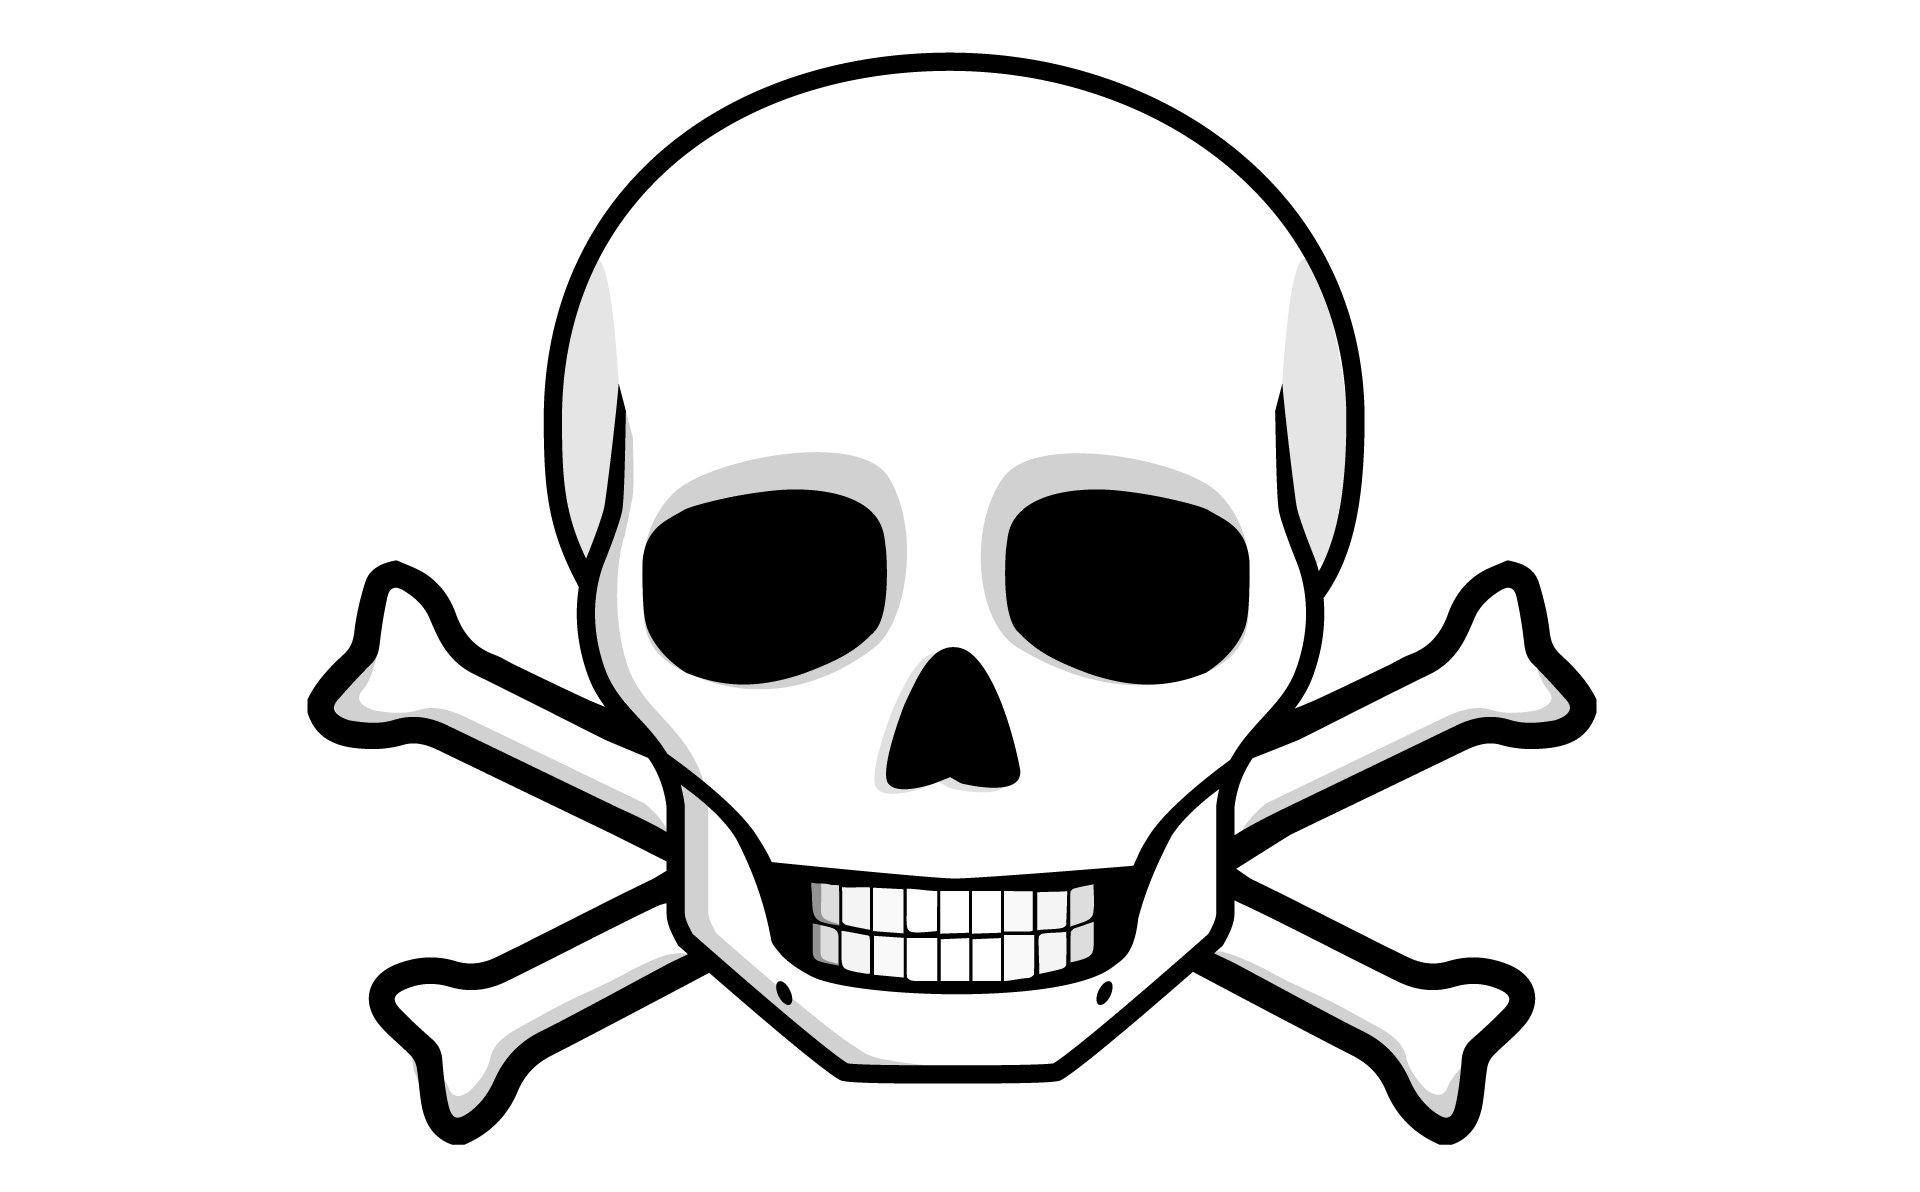 Skull and Bones Clipart - Cliparts and Others Art Inspiration